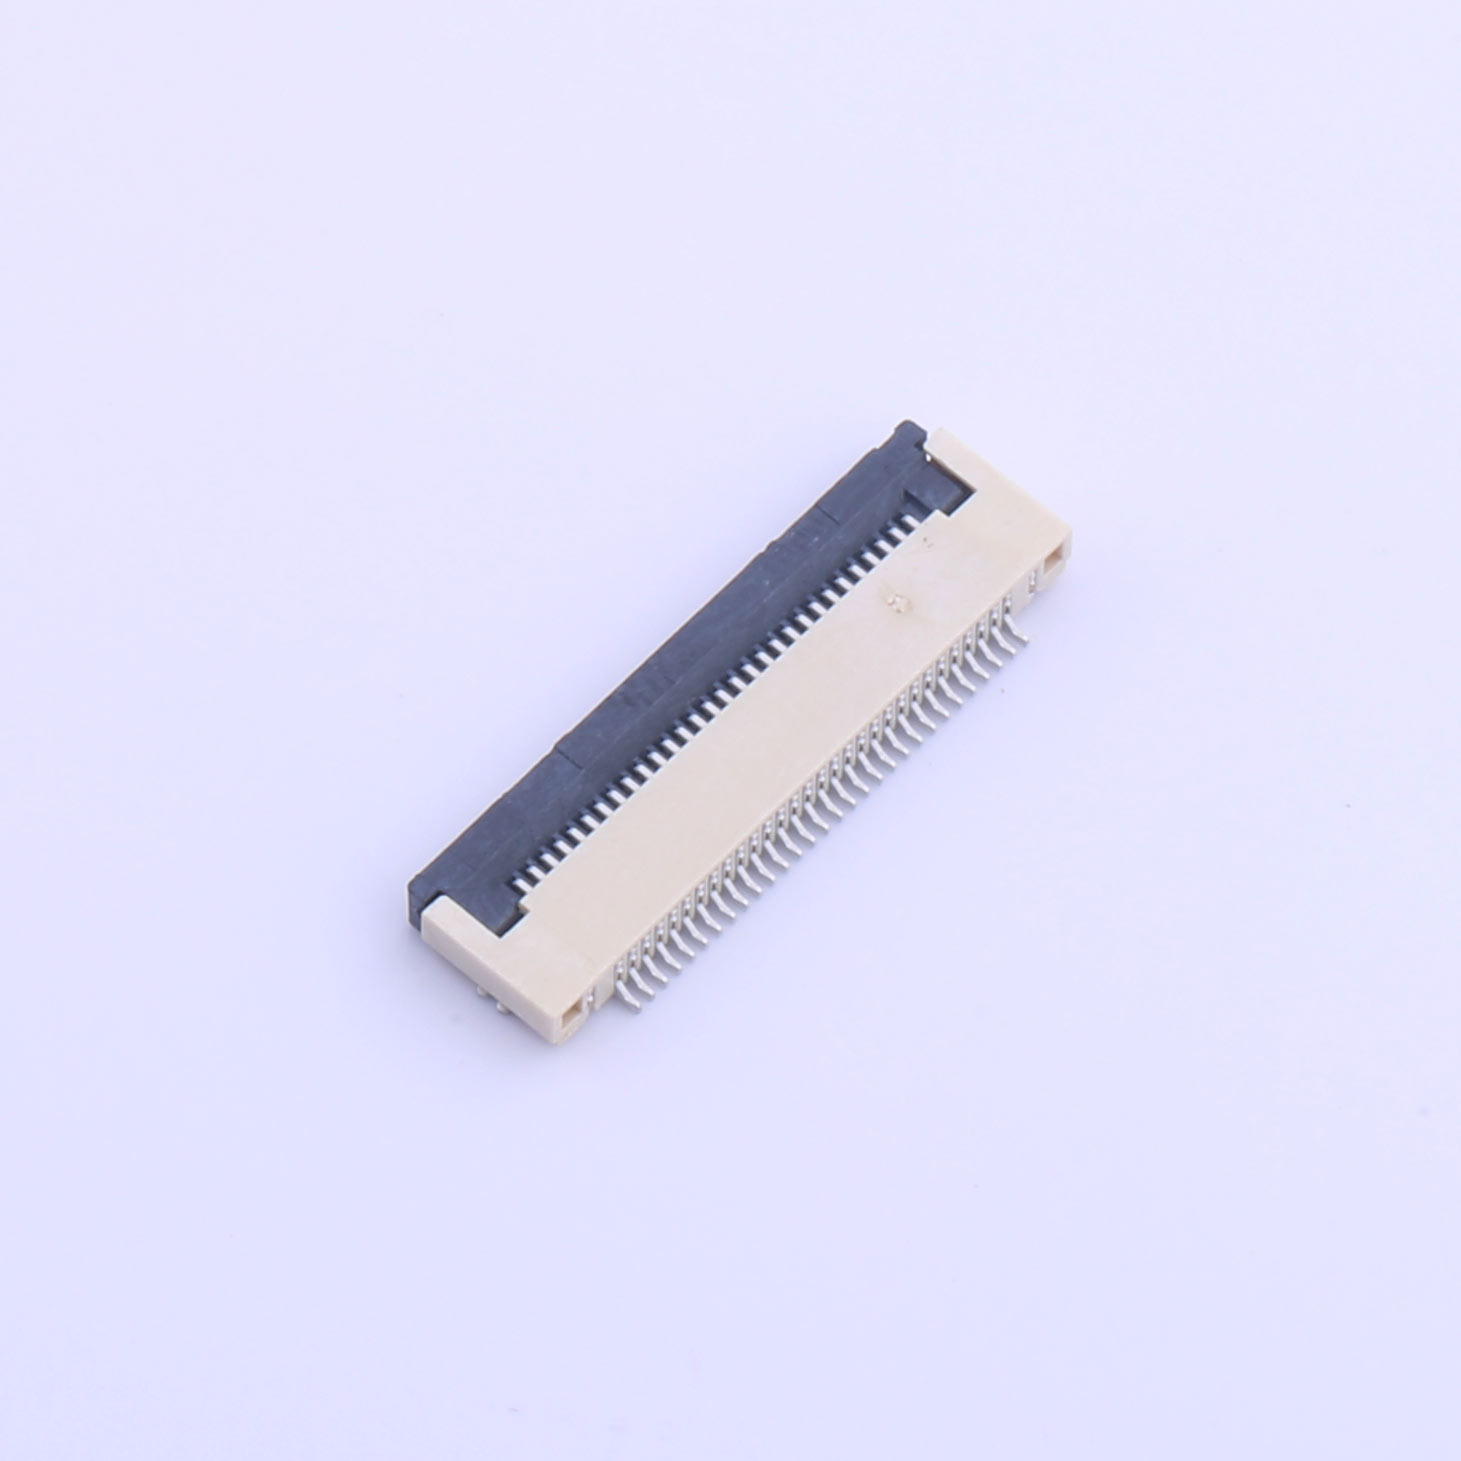 Kinghelm 0.5mm Pitch FPC FFC Connector 30P Height 2mm Front Flip Bottom Contact SMT FPC Connector--KH-FG0.5-H2.0-30PIN